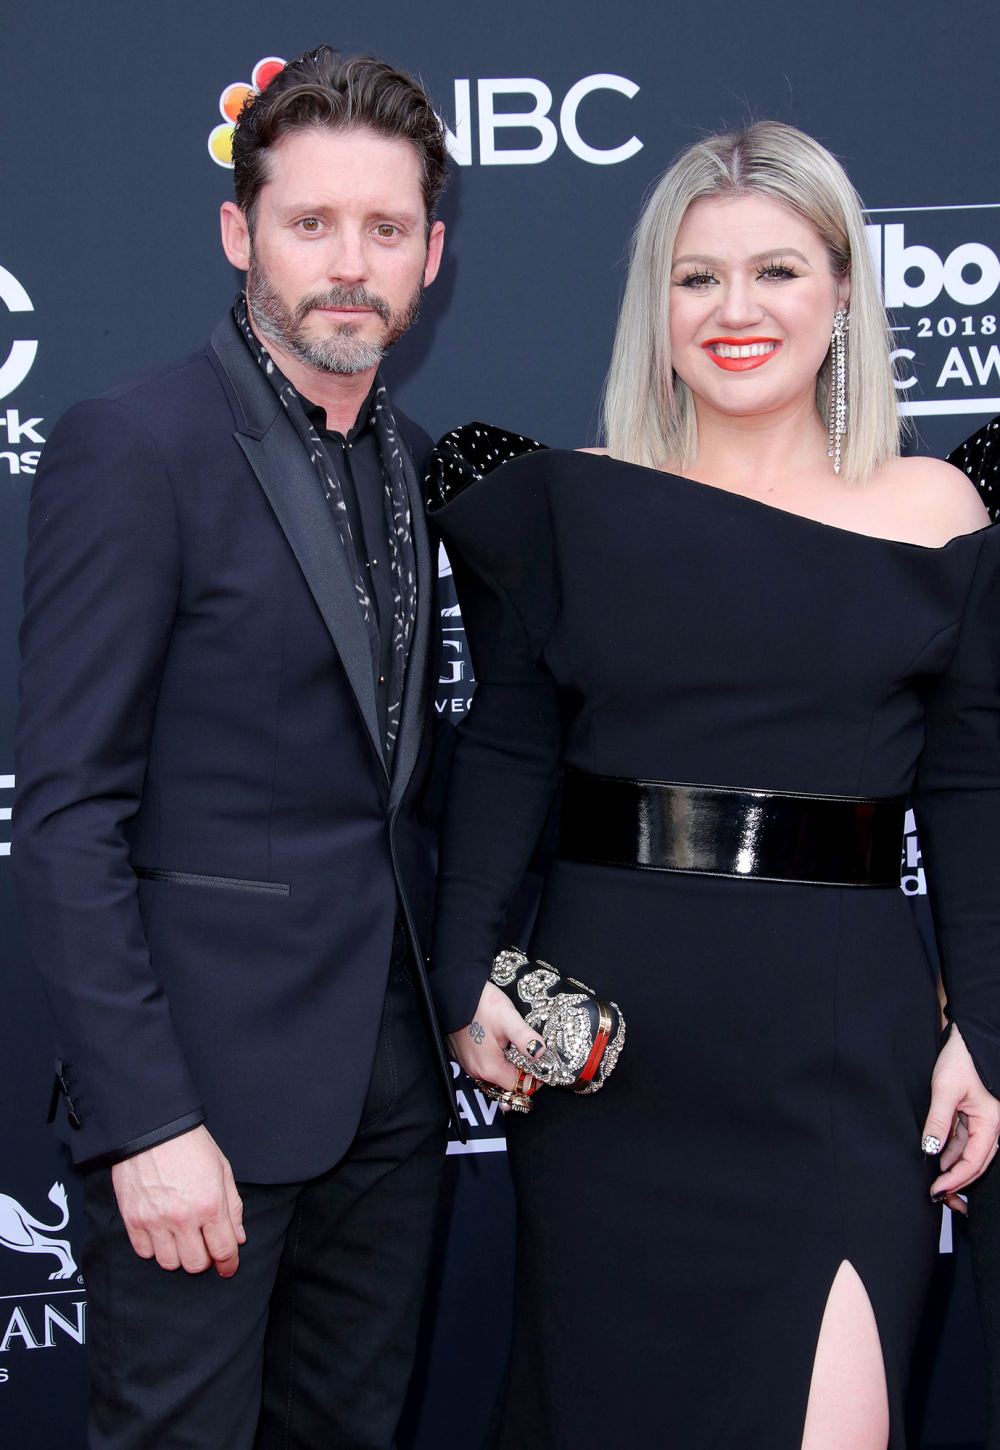 Kelly Clarkson Gives Advice for Tough Holiday Conversations Amid Divorce